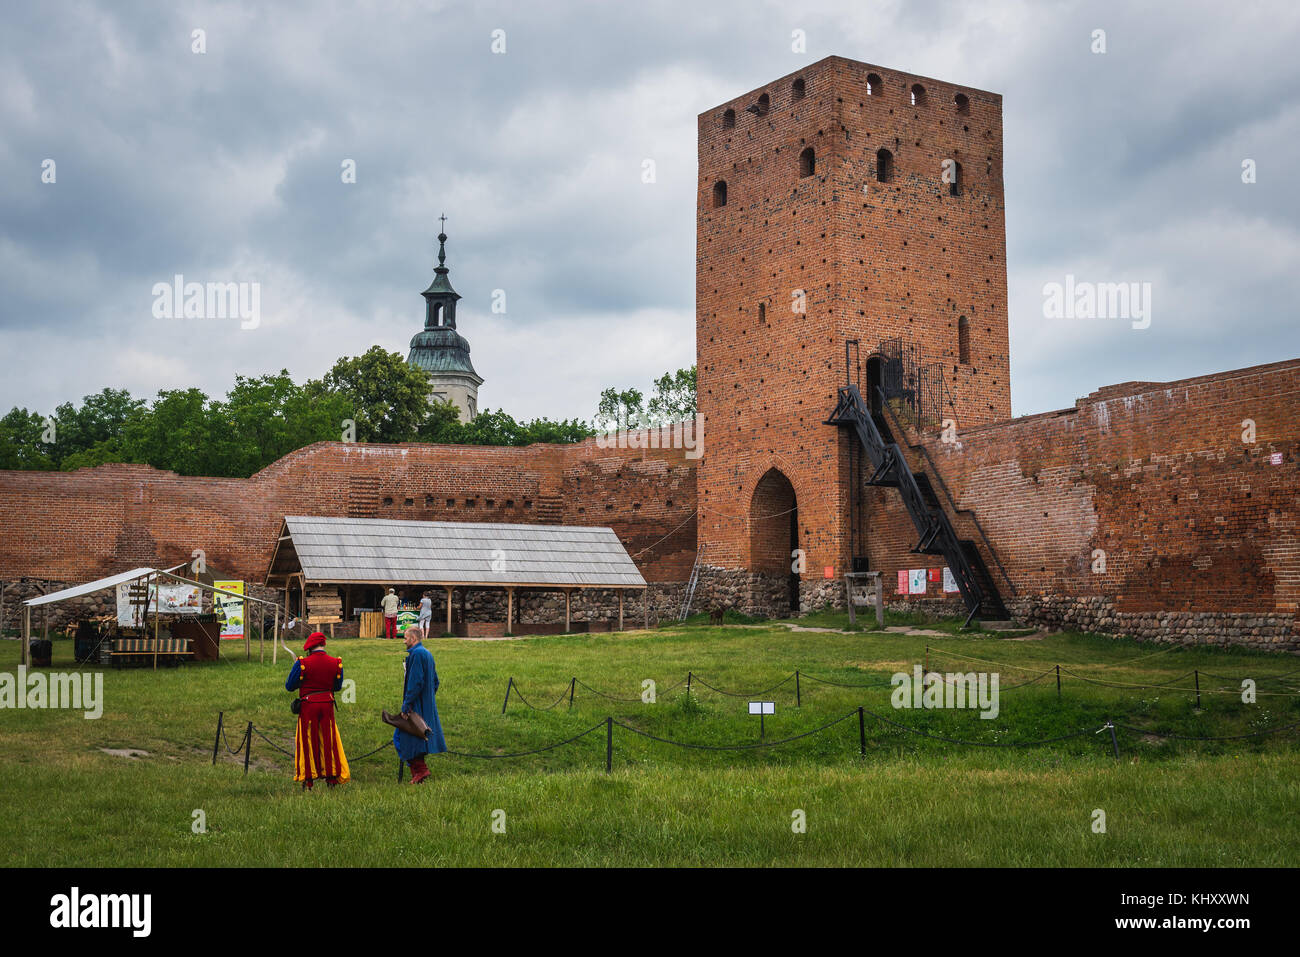 Courtyard of gothic castle of the Masovian Dukes located in Czersk village, Masovian Voivodeship in Poland Stock Photo